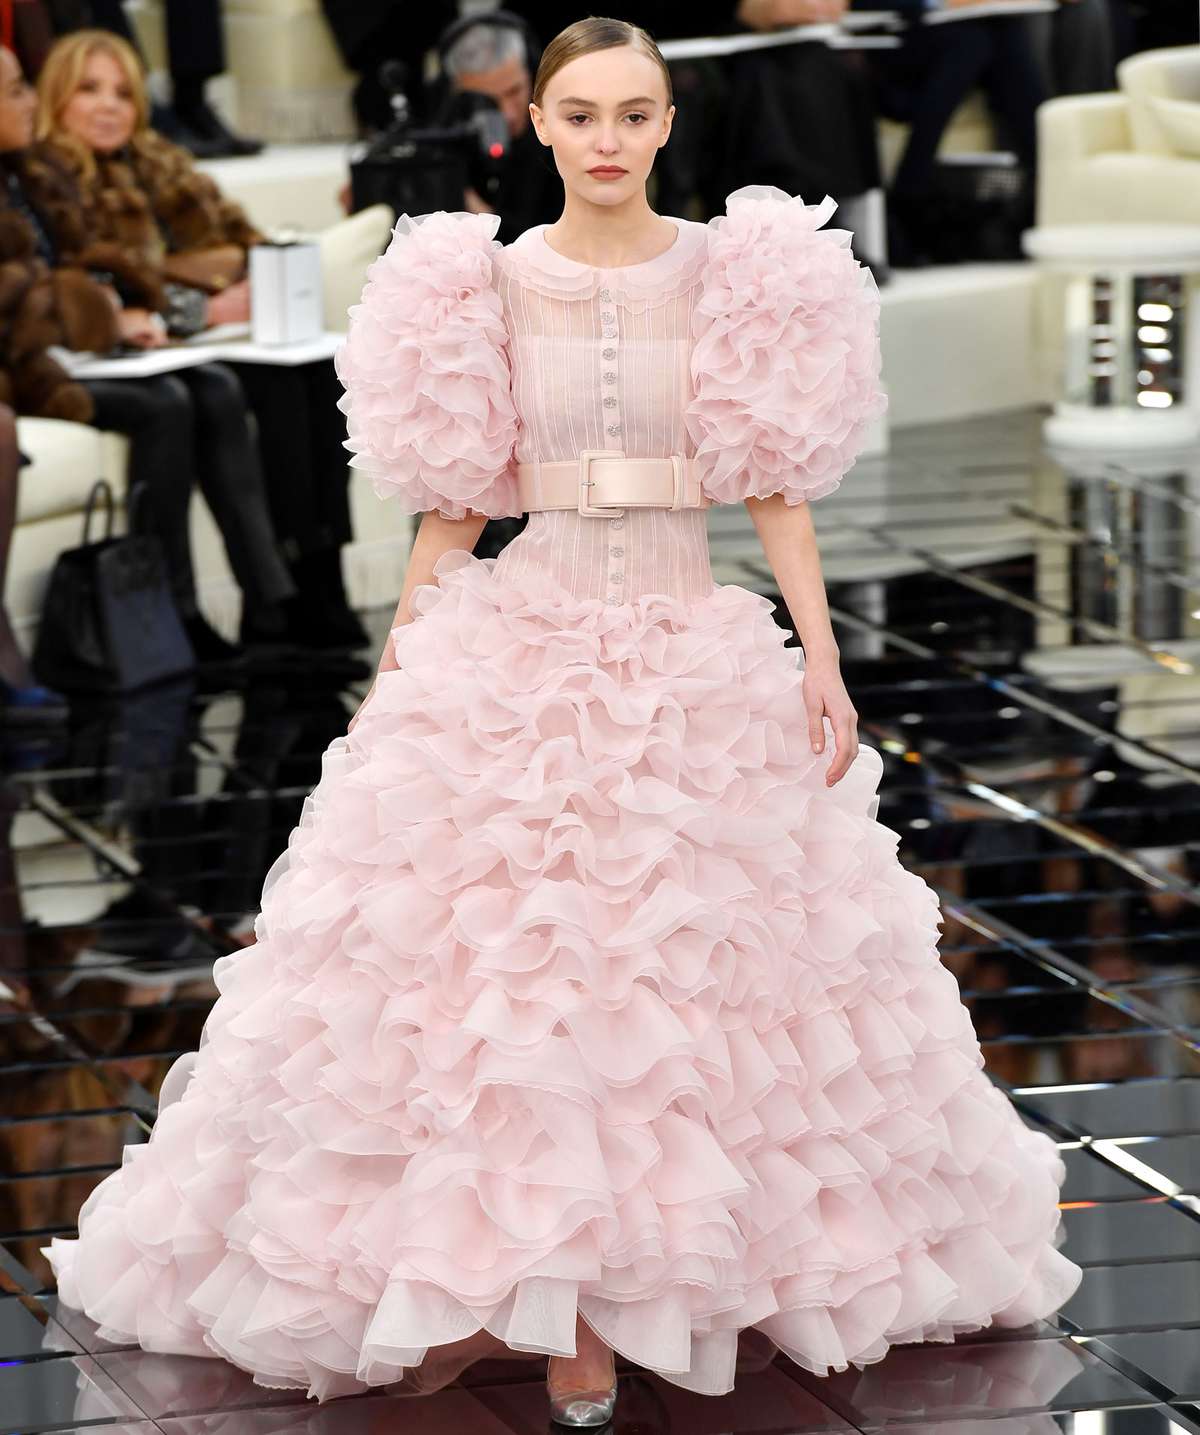 Lily-Rose Depp, the Chanel Haute Couture Bride